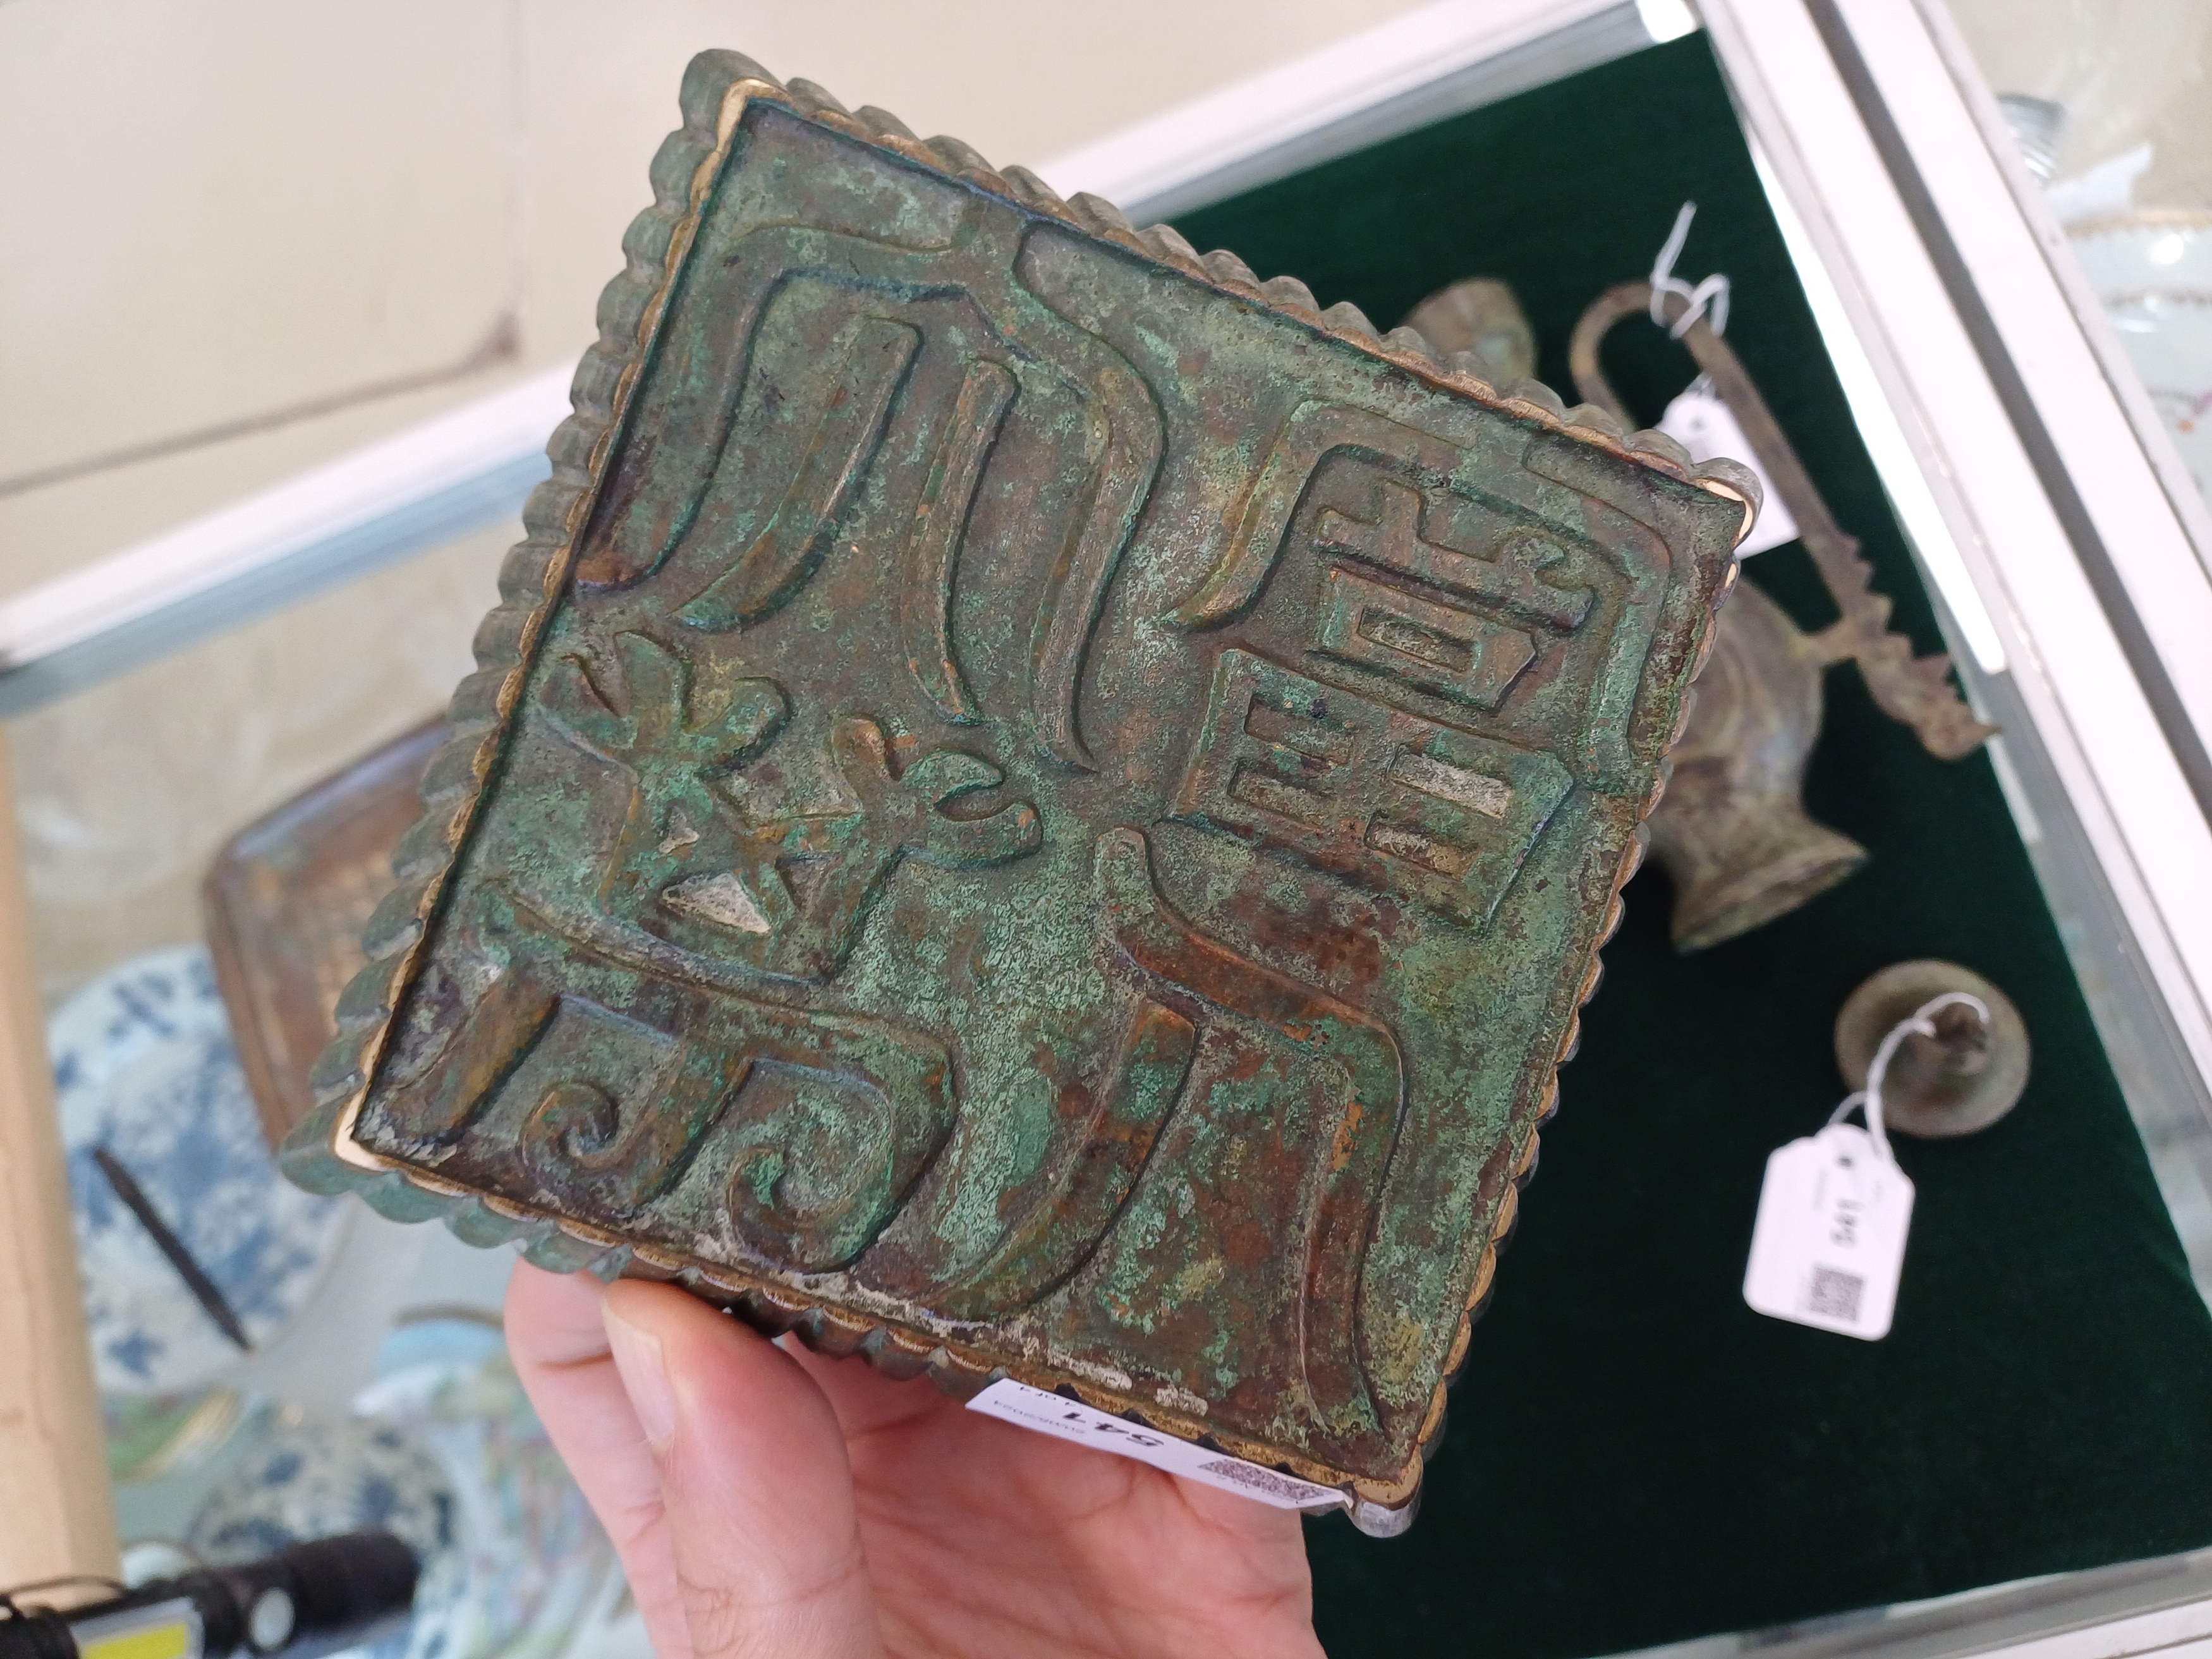 TWO CHINESE BRONZE TRAYS AND AN ARCHAISTIC EWER 民國時期 銅盤兩件及仿古執壺 - Image 8 of 15